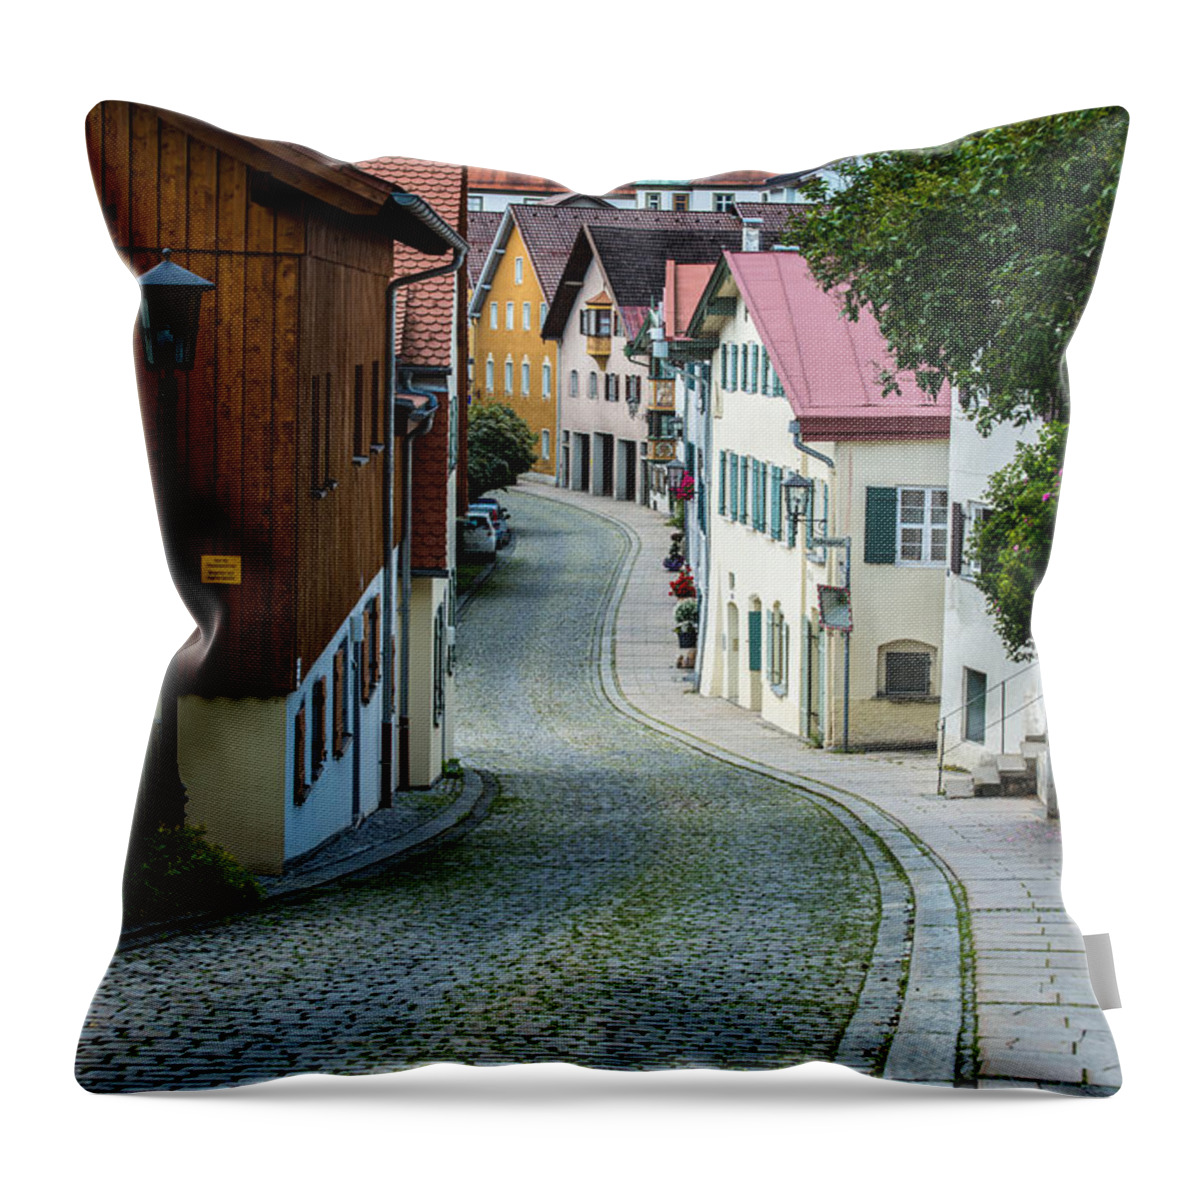 Medieval Throw Pillow featuring the photograph Medieval Cobblestone Street - Fussen - Germany by Gary Whitton